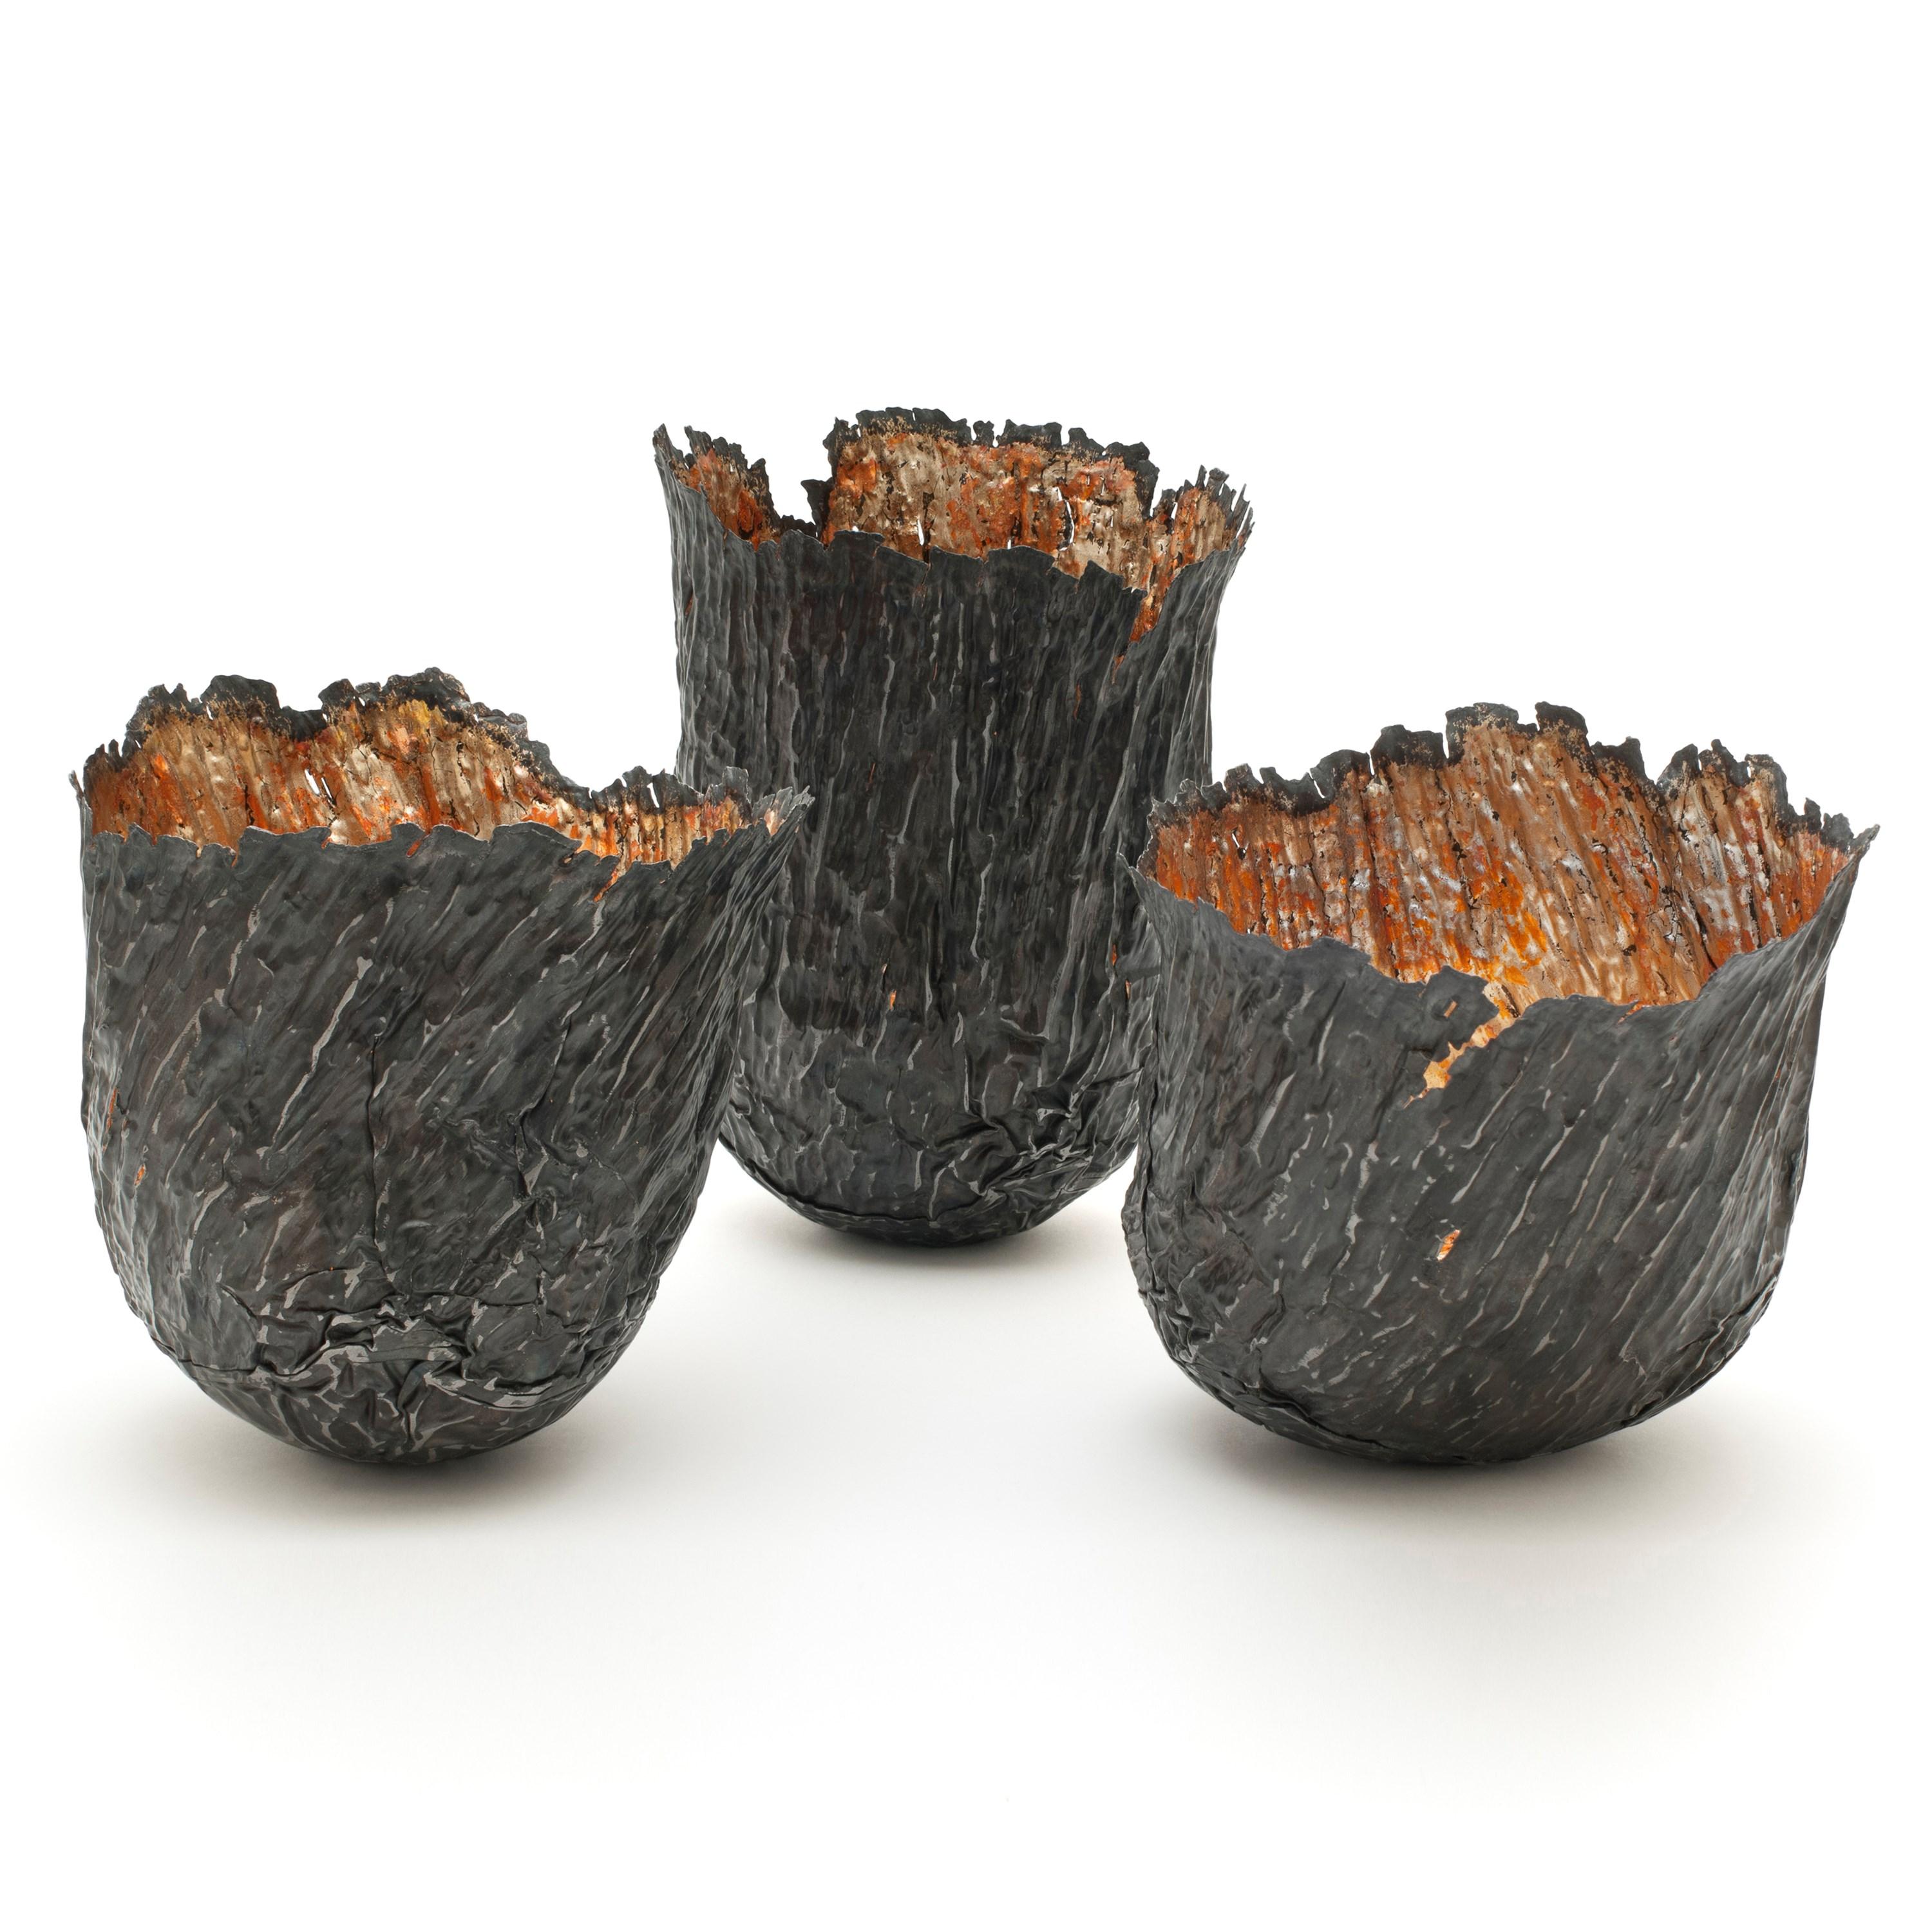 'Forest Relic Collection' is a unique trio of sculptural vessels by the British artist, Claire Malet. 

The size for each one is;

Forest Relic I 20cm H, 14cm ø £1375
?Forest Relic II 15cm H, 14cm ø £1200?
Forest Relic III 15cm H, 14cm ø